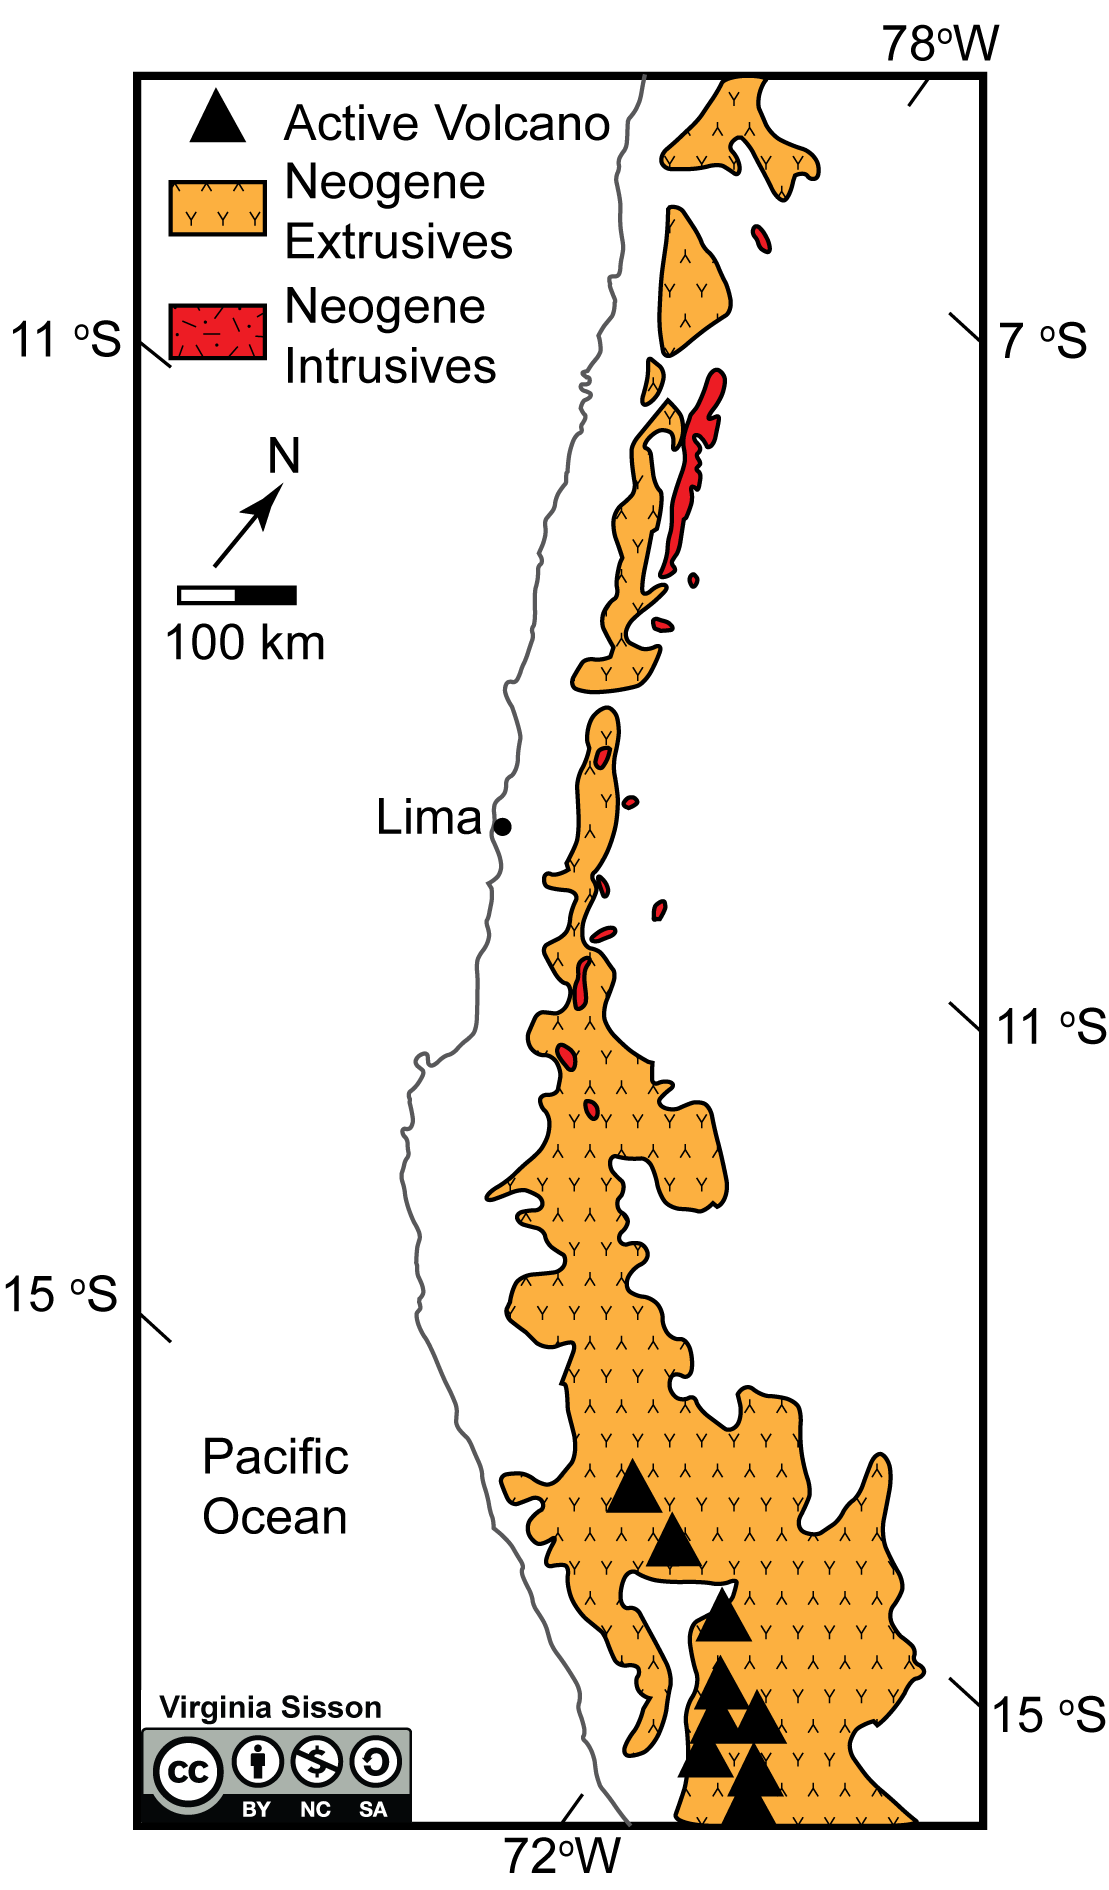 This map shows igneous rocks (extrusive in orange, intrusive in red) and volcanoes from a region in Peru.